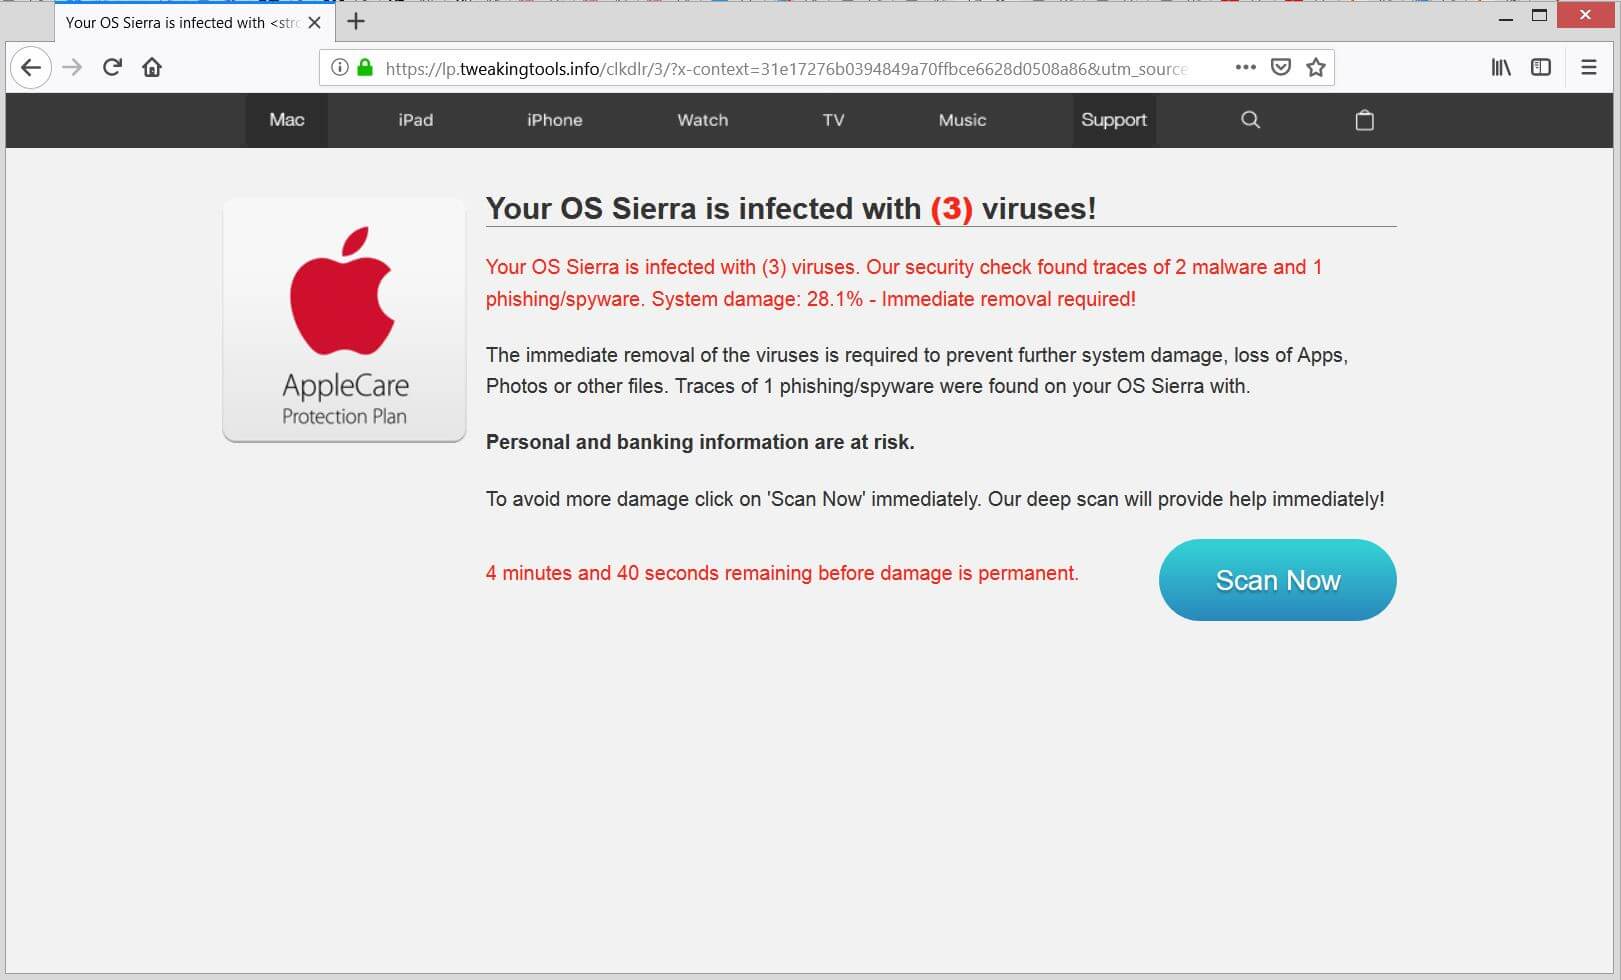 Your OS Sierra is infected with (3) viruses! scam message loaded by lp.tweakingtools.info website